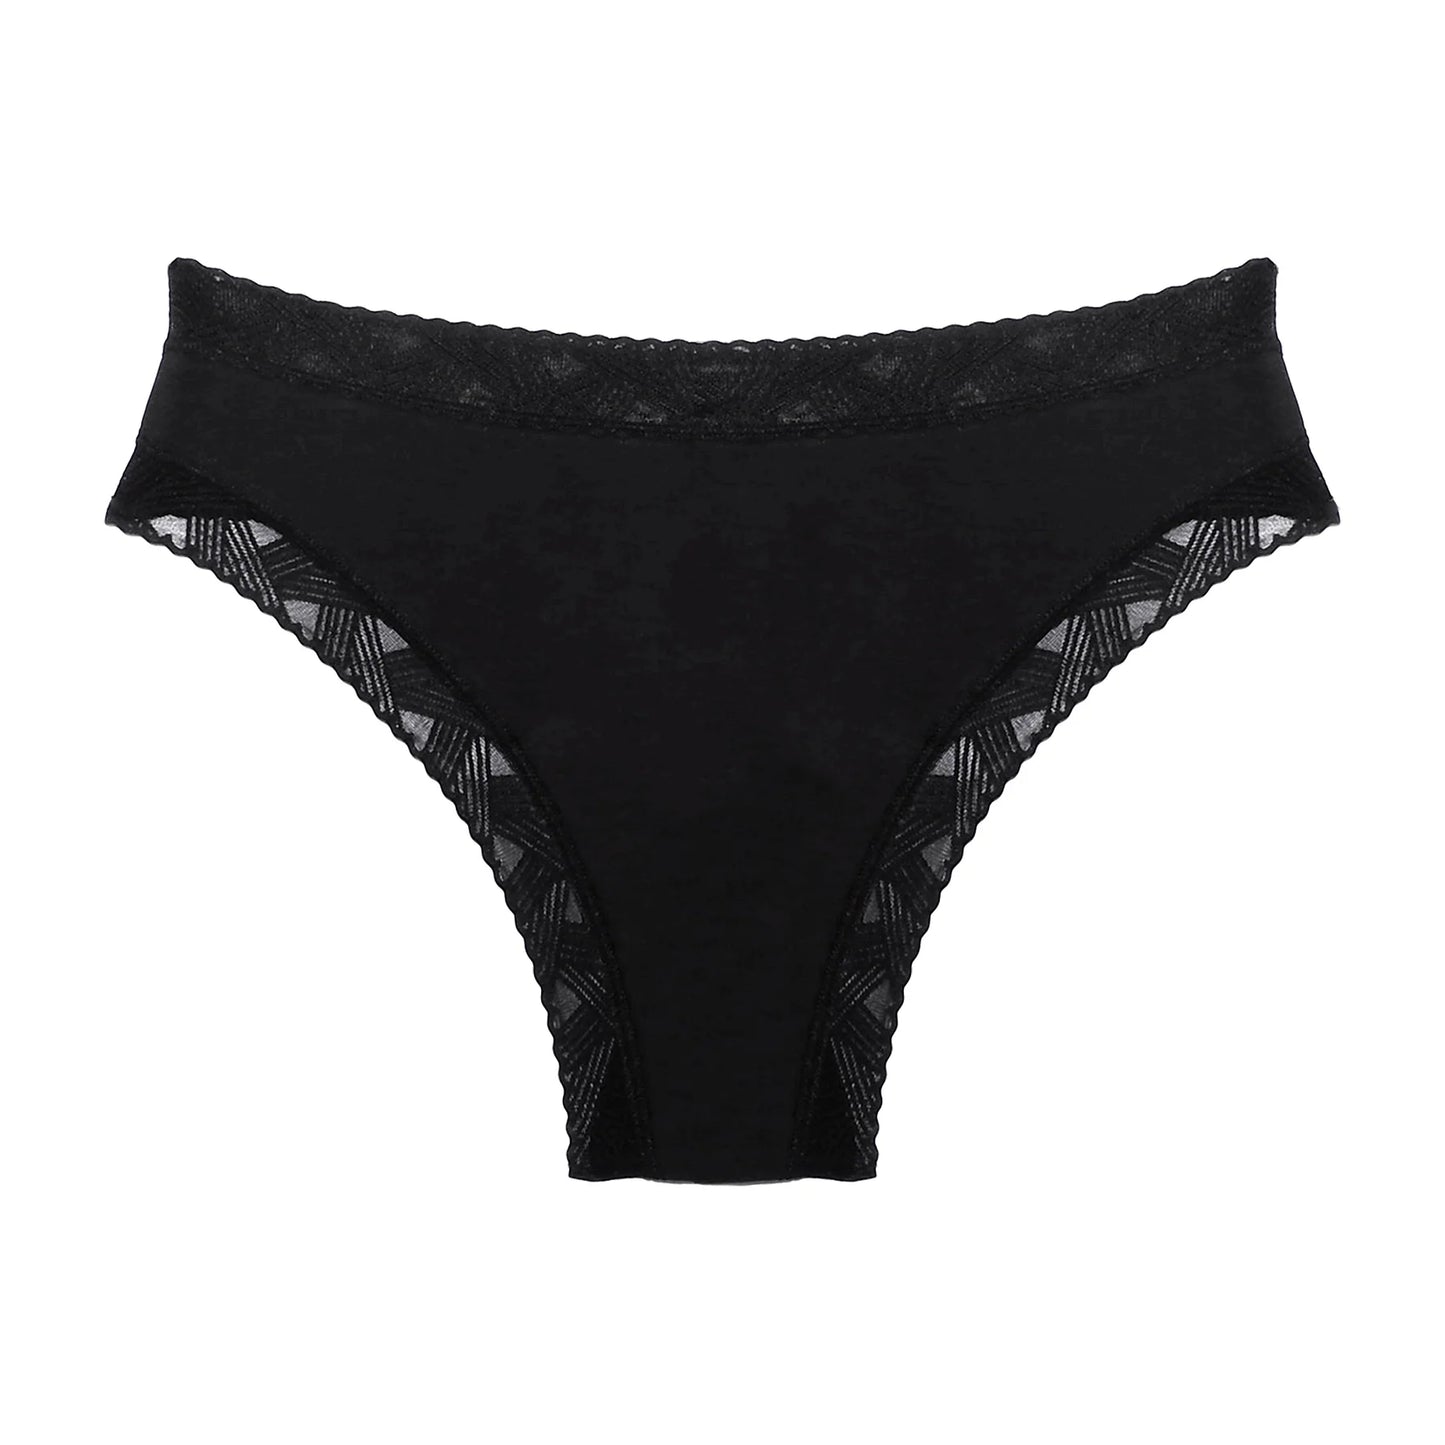 Underprotection Period Thong - Black